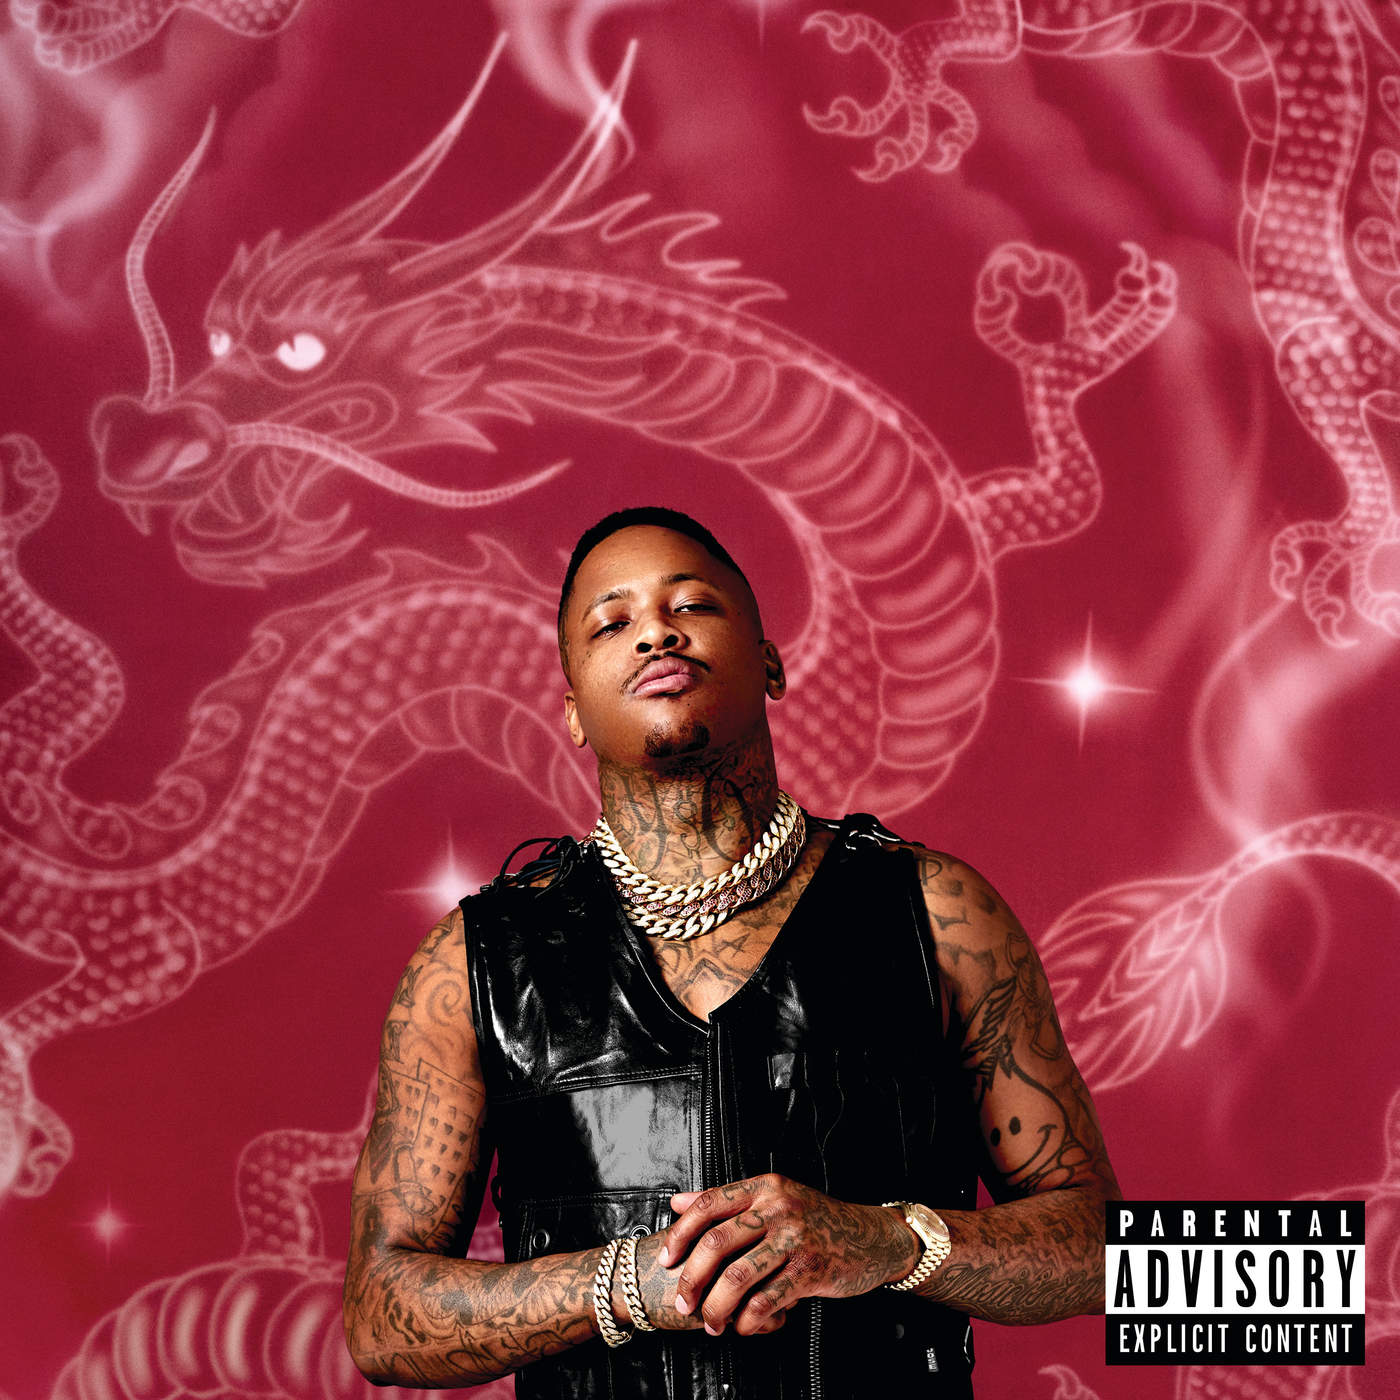 Art for 10 TIMES by YG